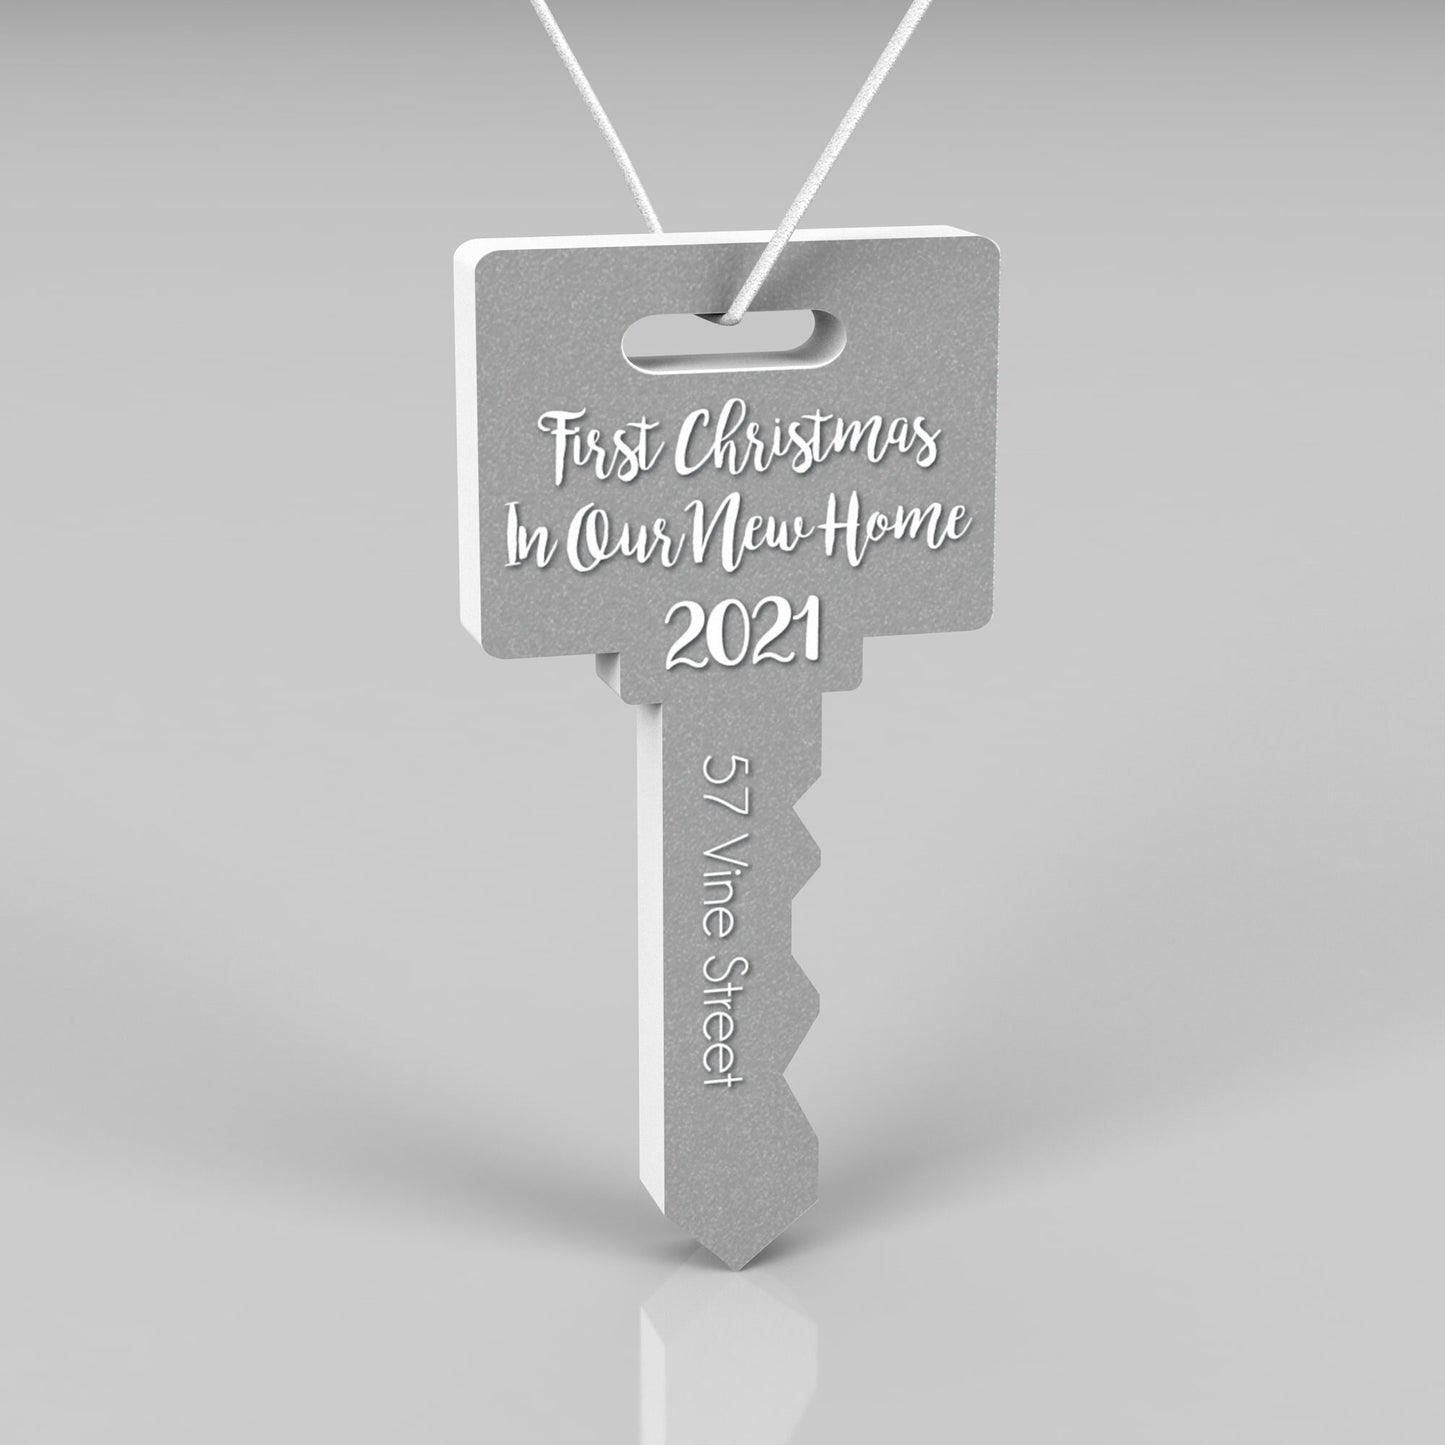 2023 New Home Christmas Ornament, Personalized Ornament, Key Shape Christmas Ornament, Housewarming Gift